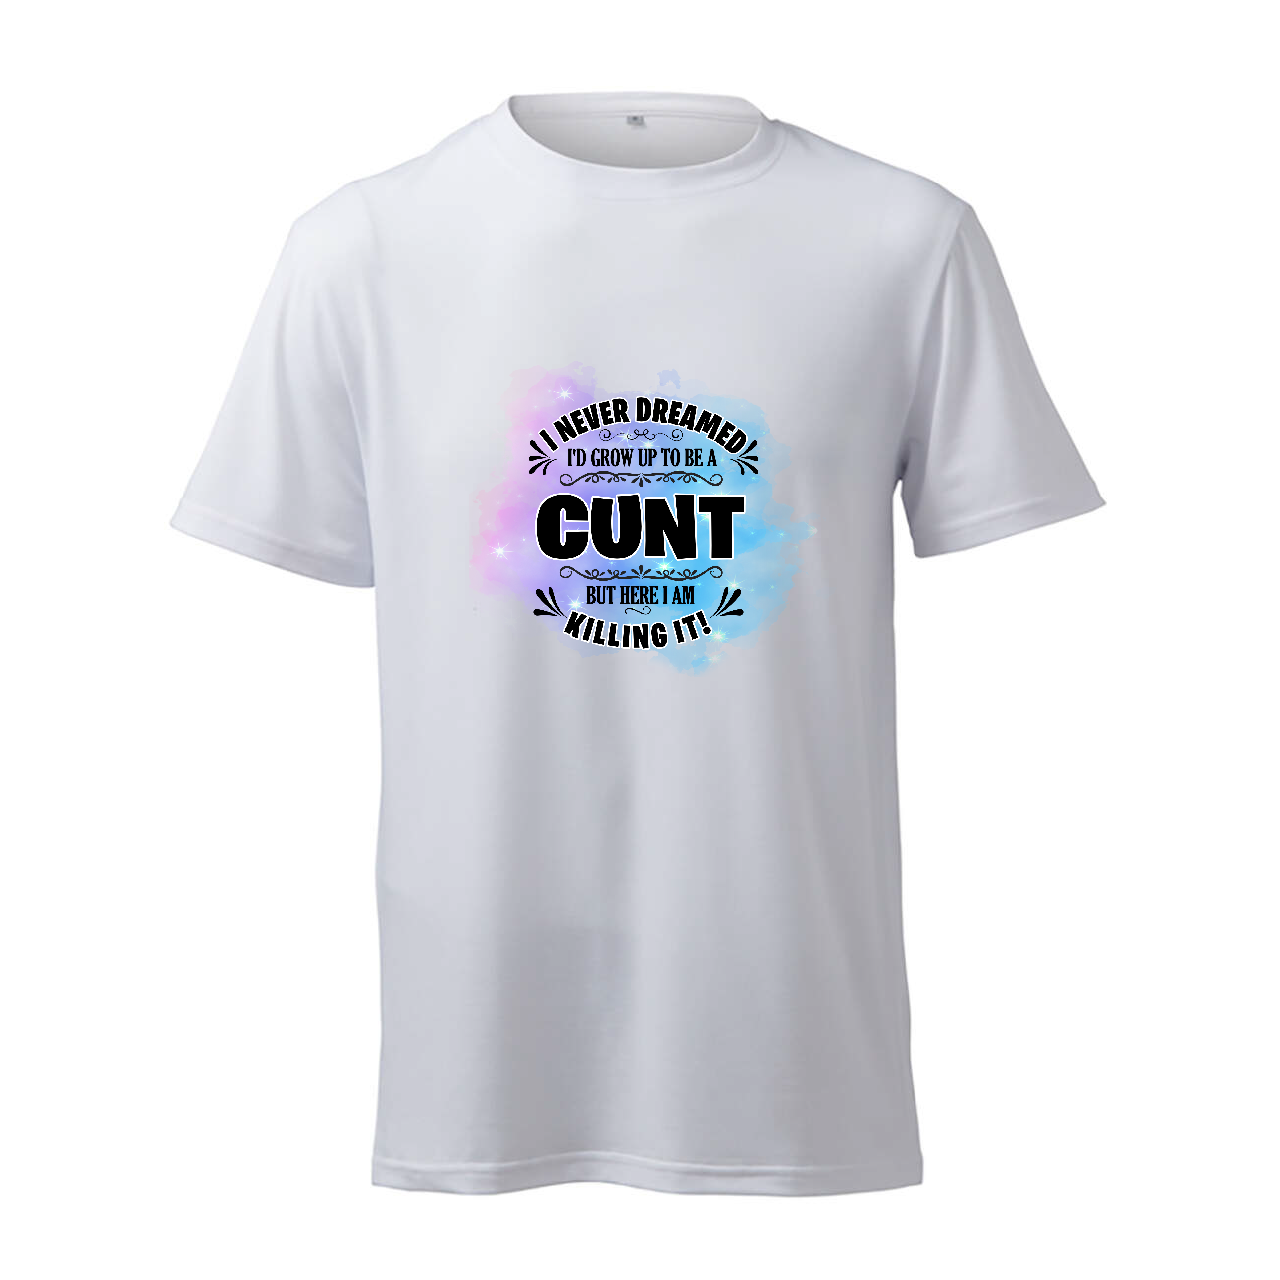 I Never Dreamed Of Being A Cunt (Blue) - T-Shirt